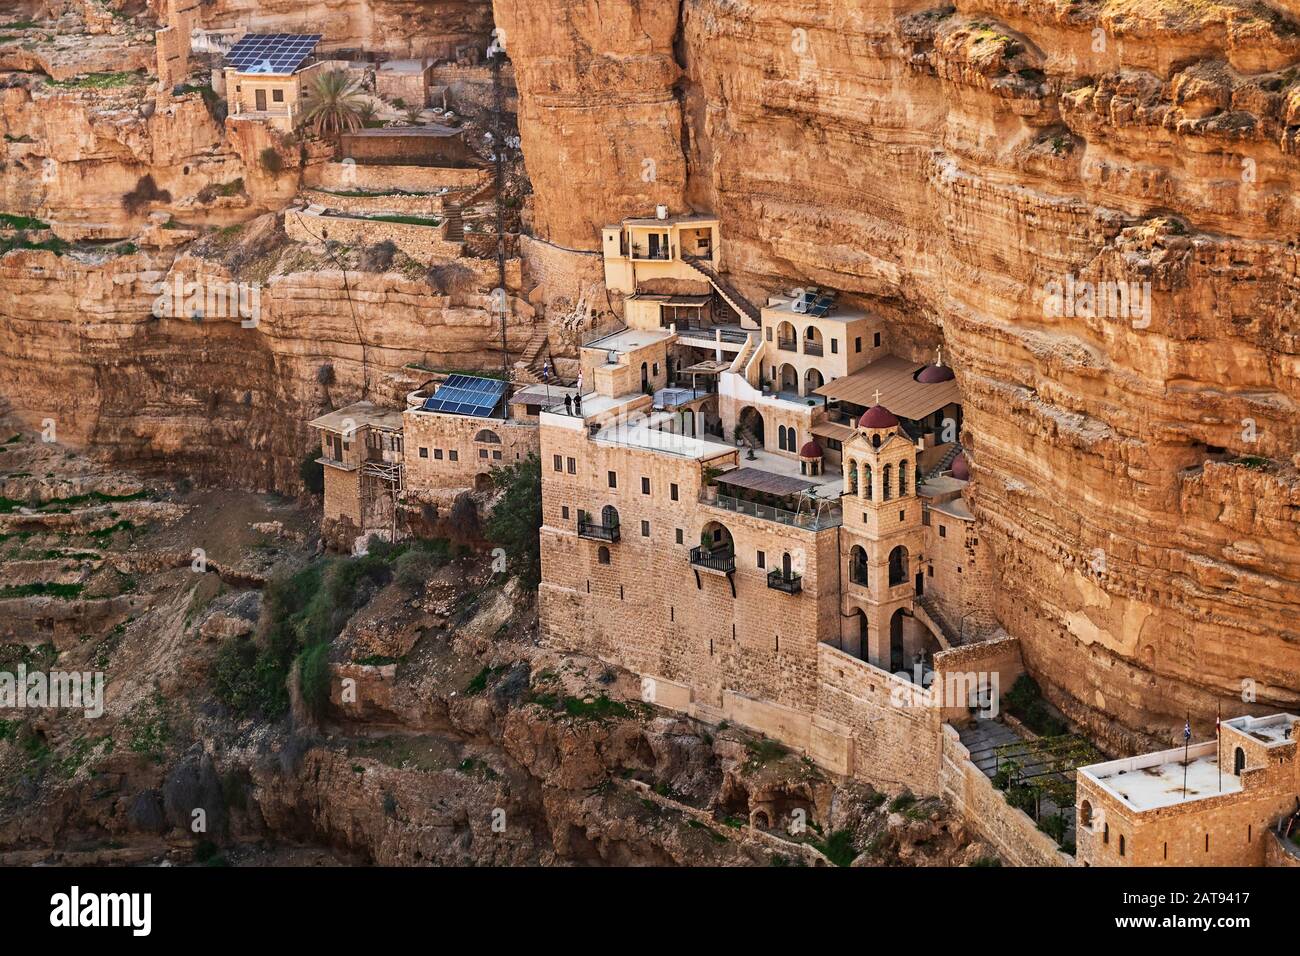 western side of the ancient saint george's monastery built into the limestone cliffs and caves of wadi qelt nahal prat near jericho in the west bank Stock Photo